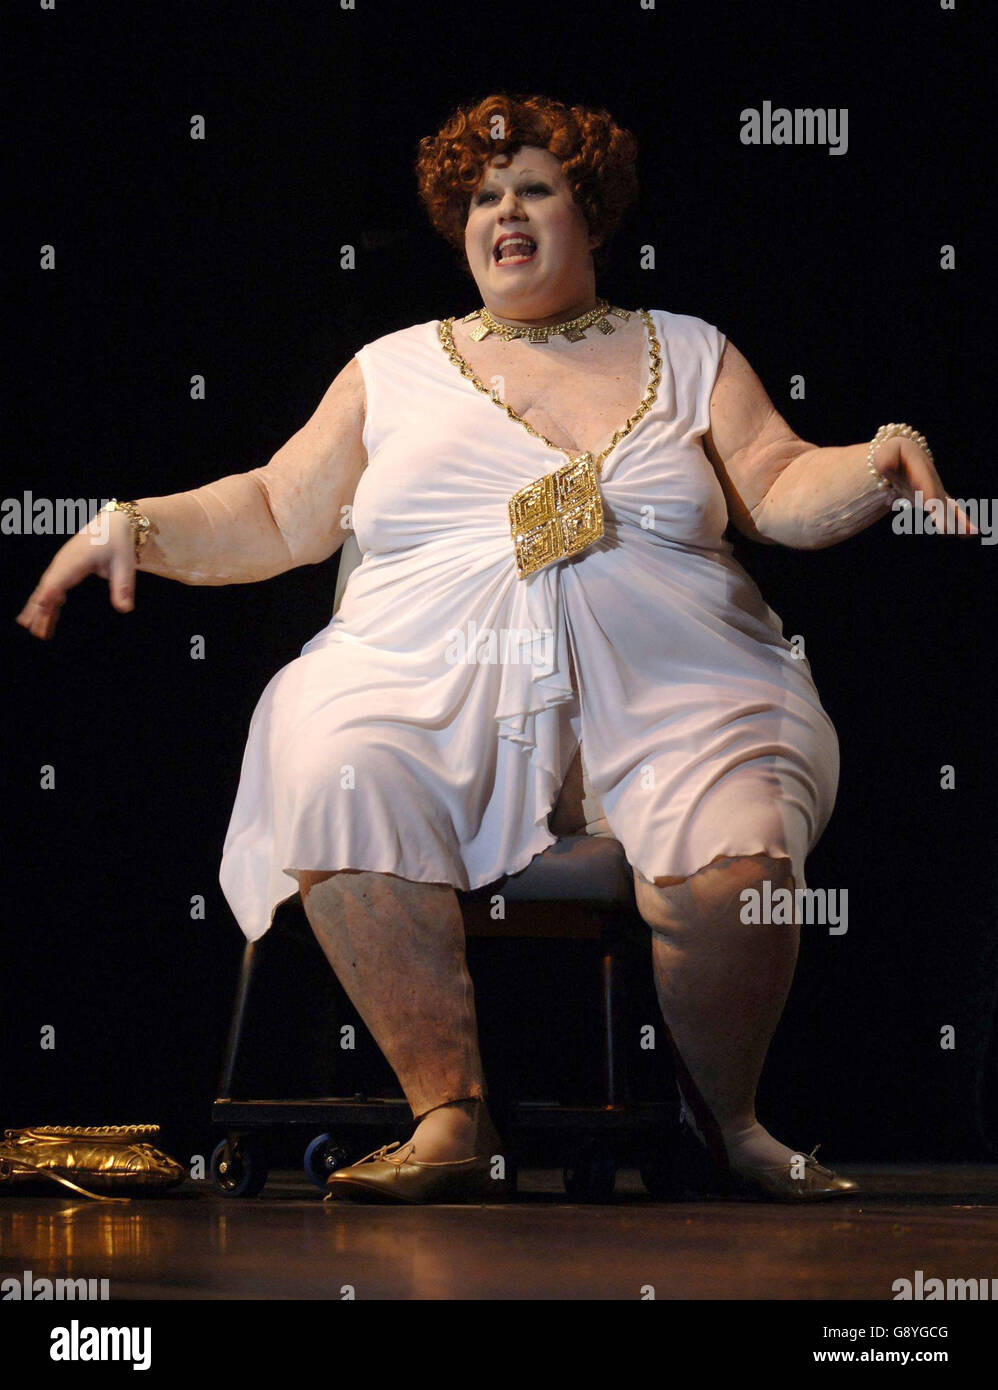 NEWSPAPER USE ONLY IN THE UK. AP OUT. Matt Lucas as Bubbles De Vere from  the television comedy series 'Little Britain', during rehearsals for the  Little Britain live stage show tour, at